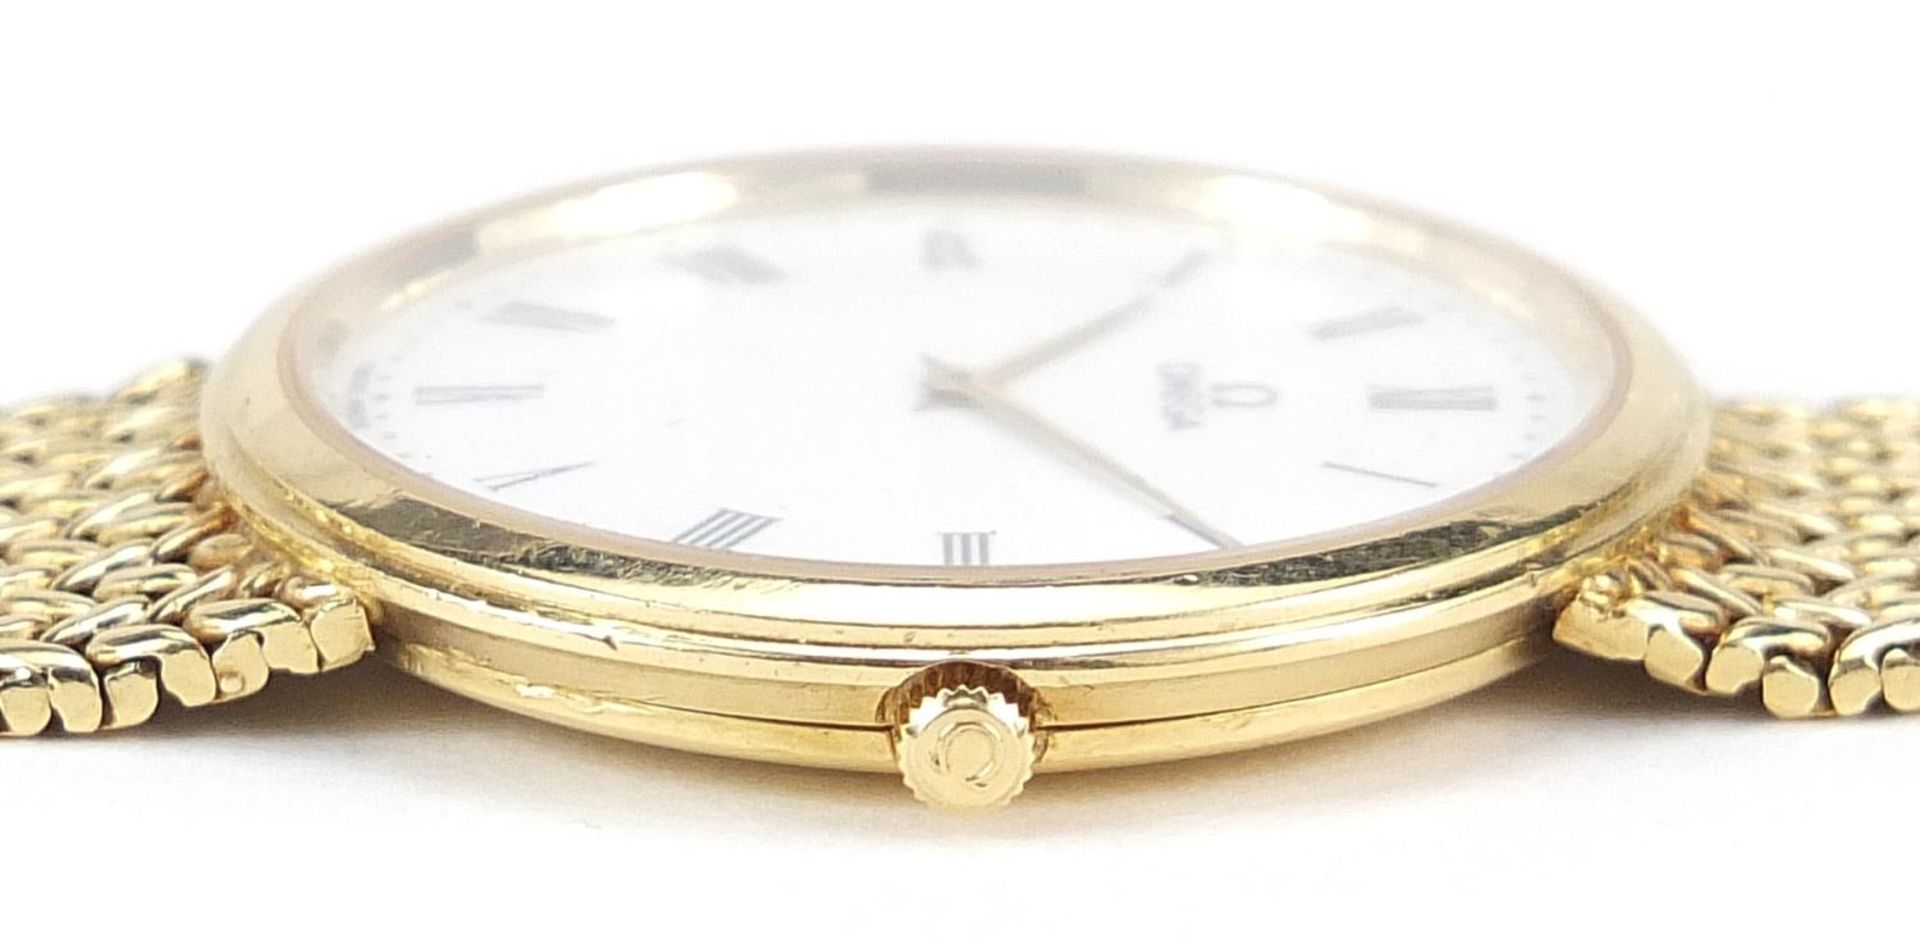 Omega, 18ct gold gentlemen's wristwatch with 18ct gold strap, 31mm in diameter, 71.4g - this lot - Image 7 of 7